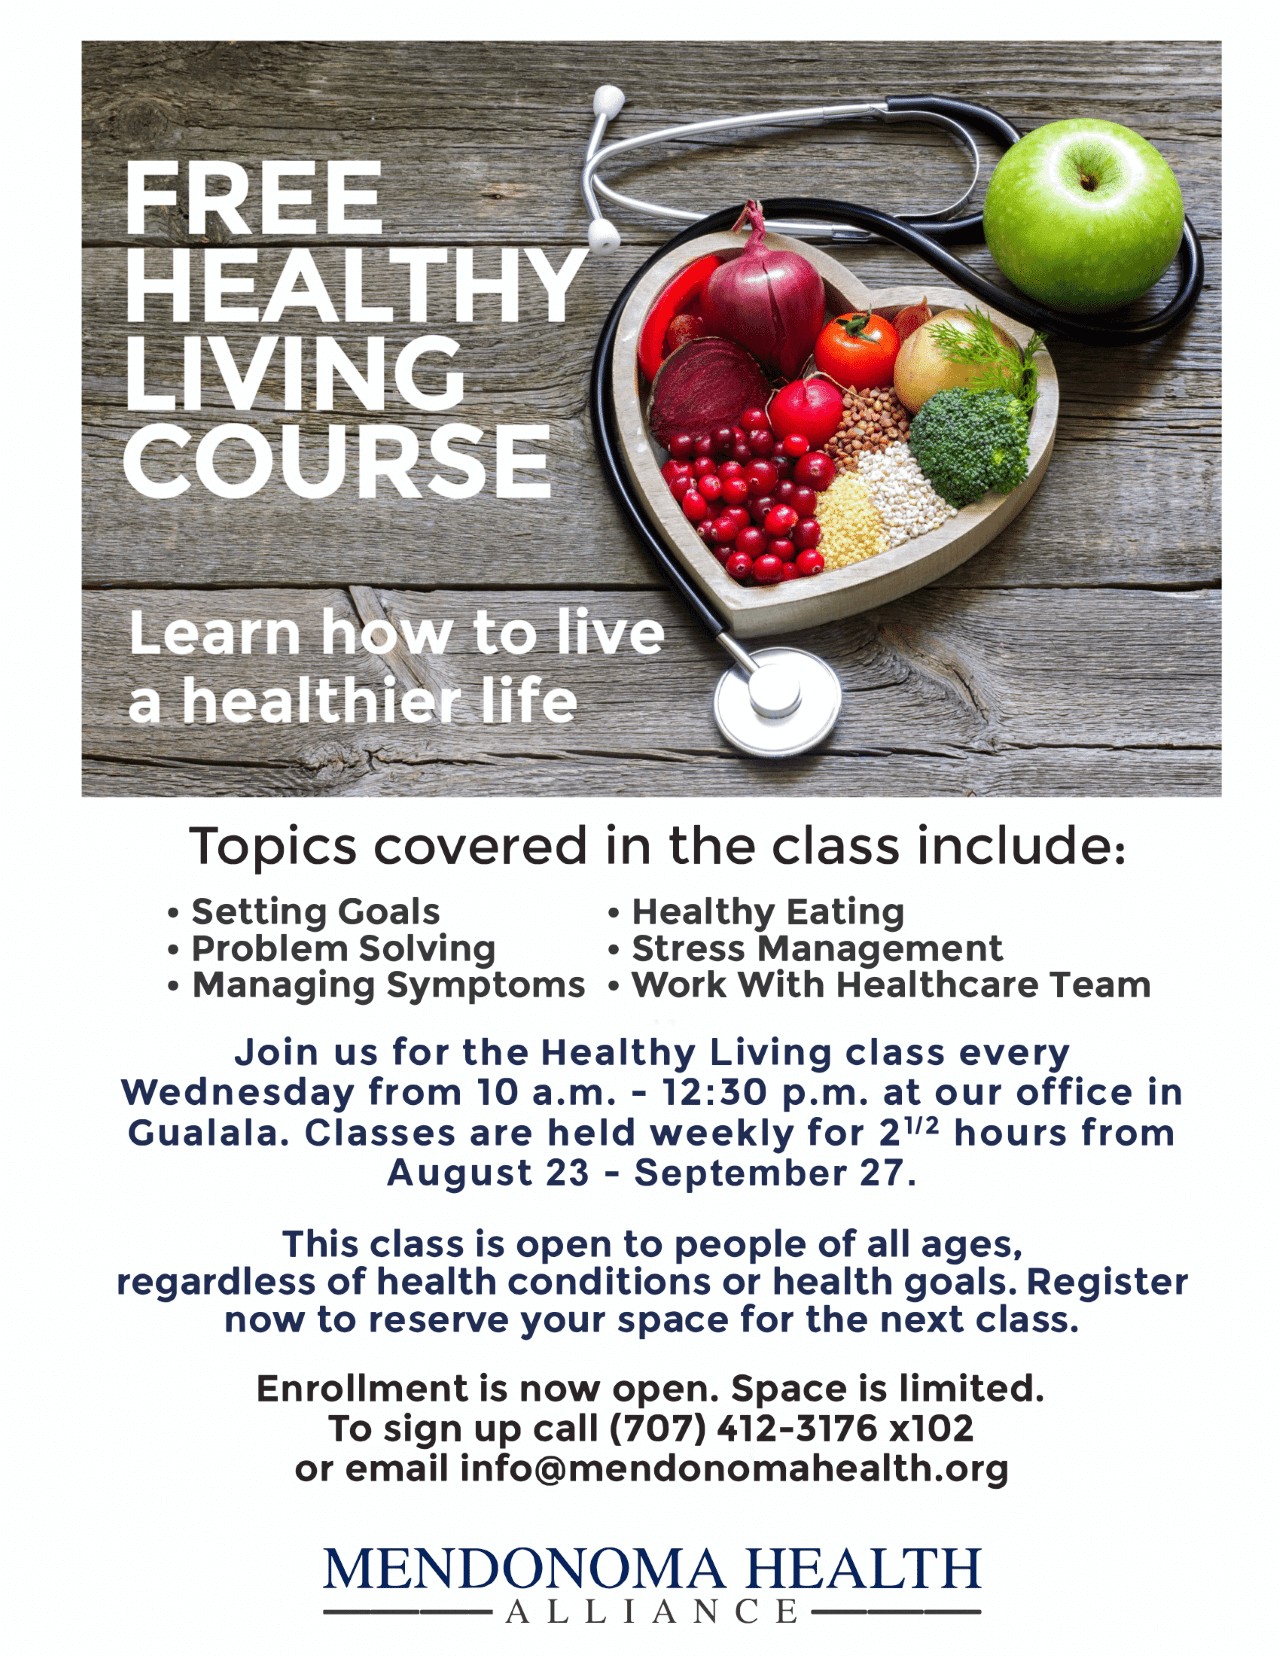 Flyer with wooden slat background with heart shaped dish filled with fruit and vegetables. A green apple & stethoscope with outside dish. Advertising Healthy Living Course starting August 23